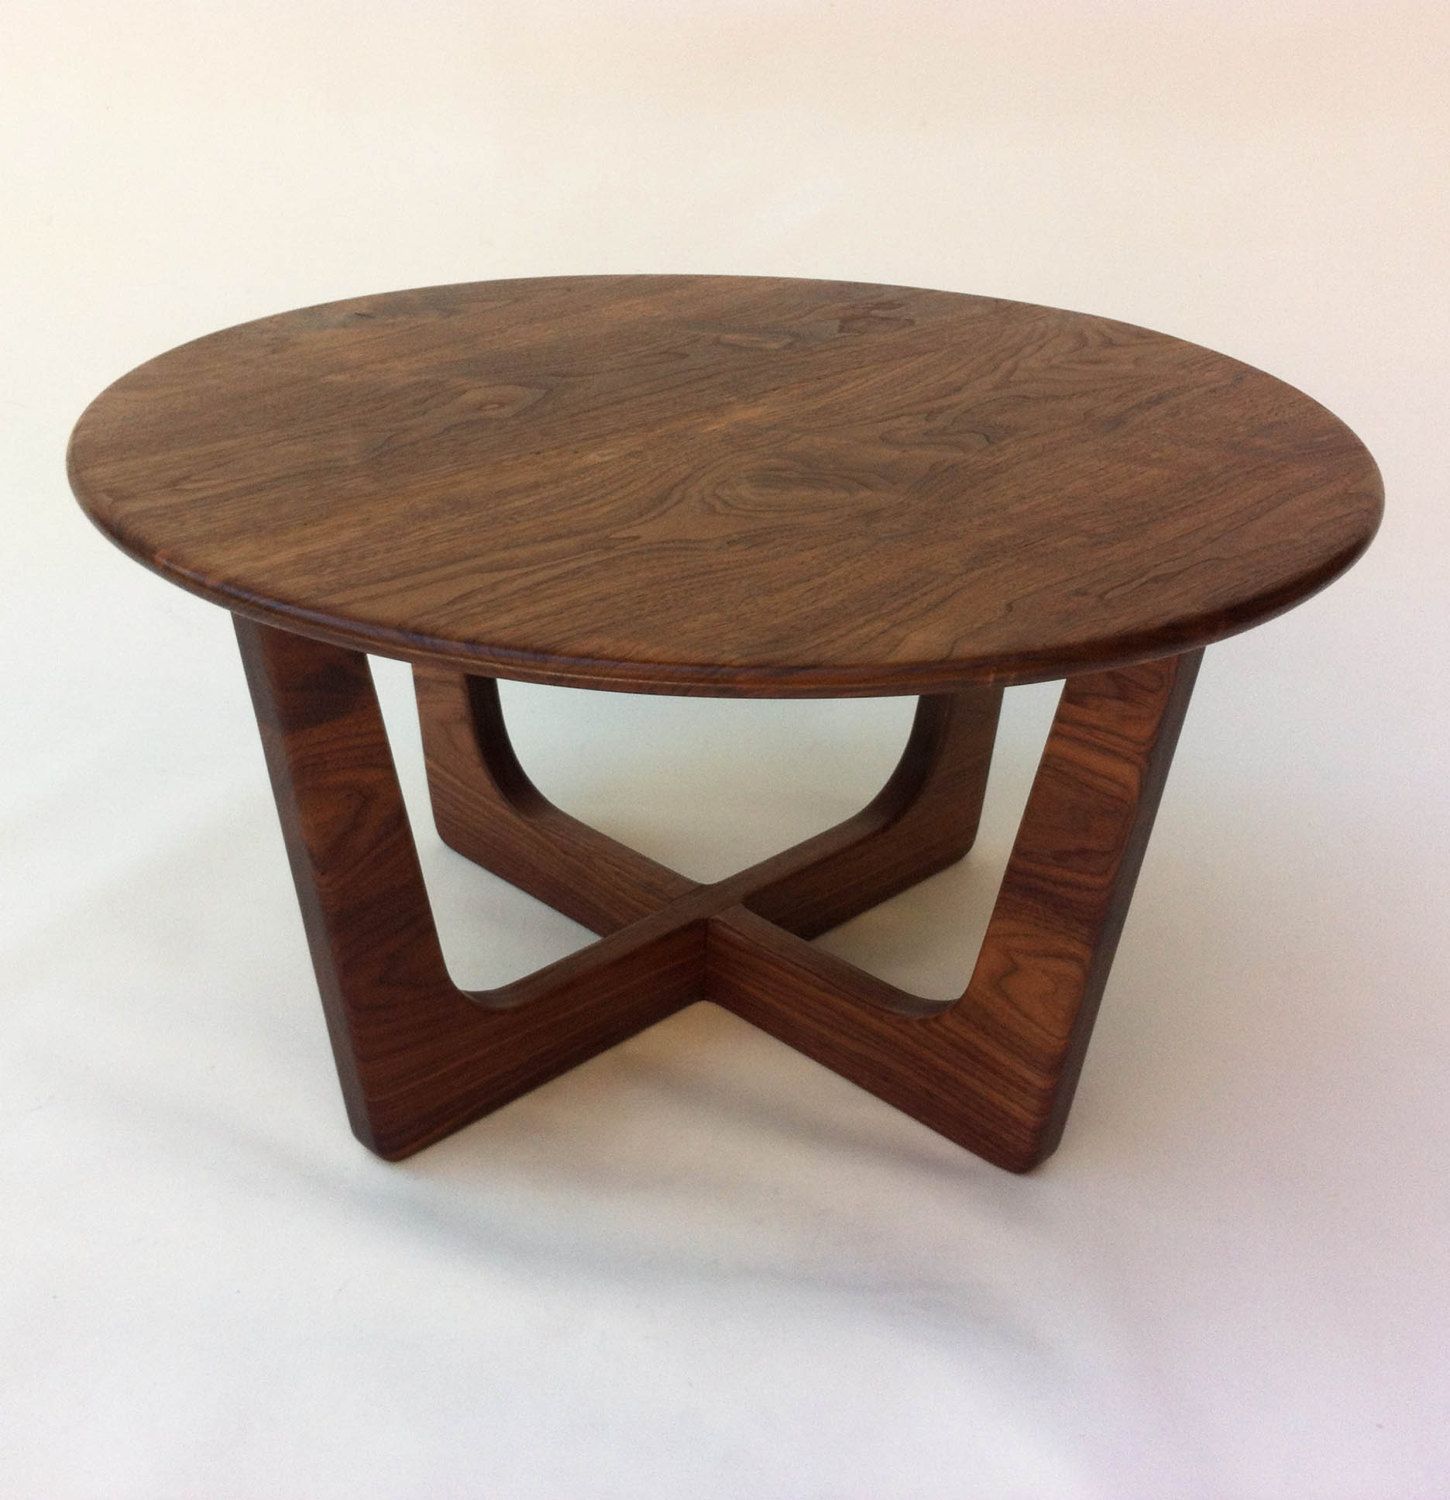 Solid Walnut Round Mid Century Modern Coffee Table In Coffee Tables With Solid Legs (Gallery 7 of 20)